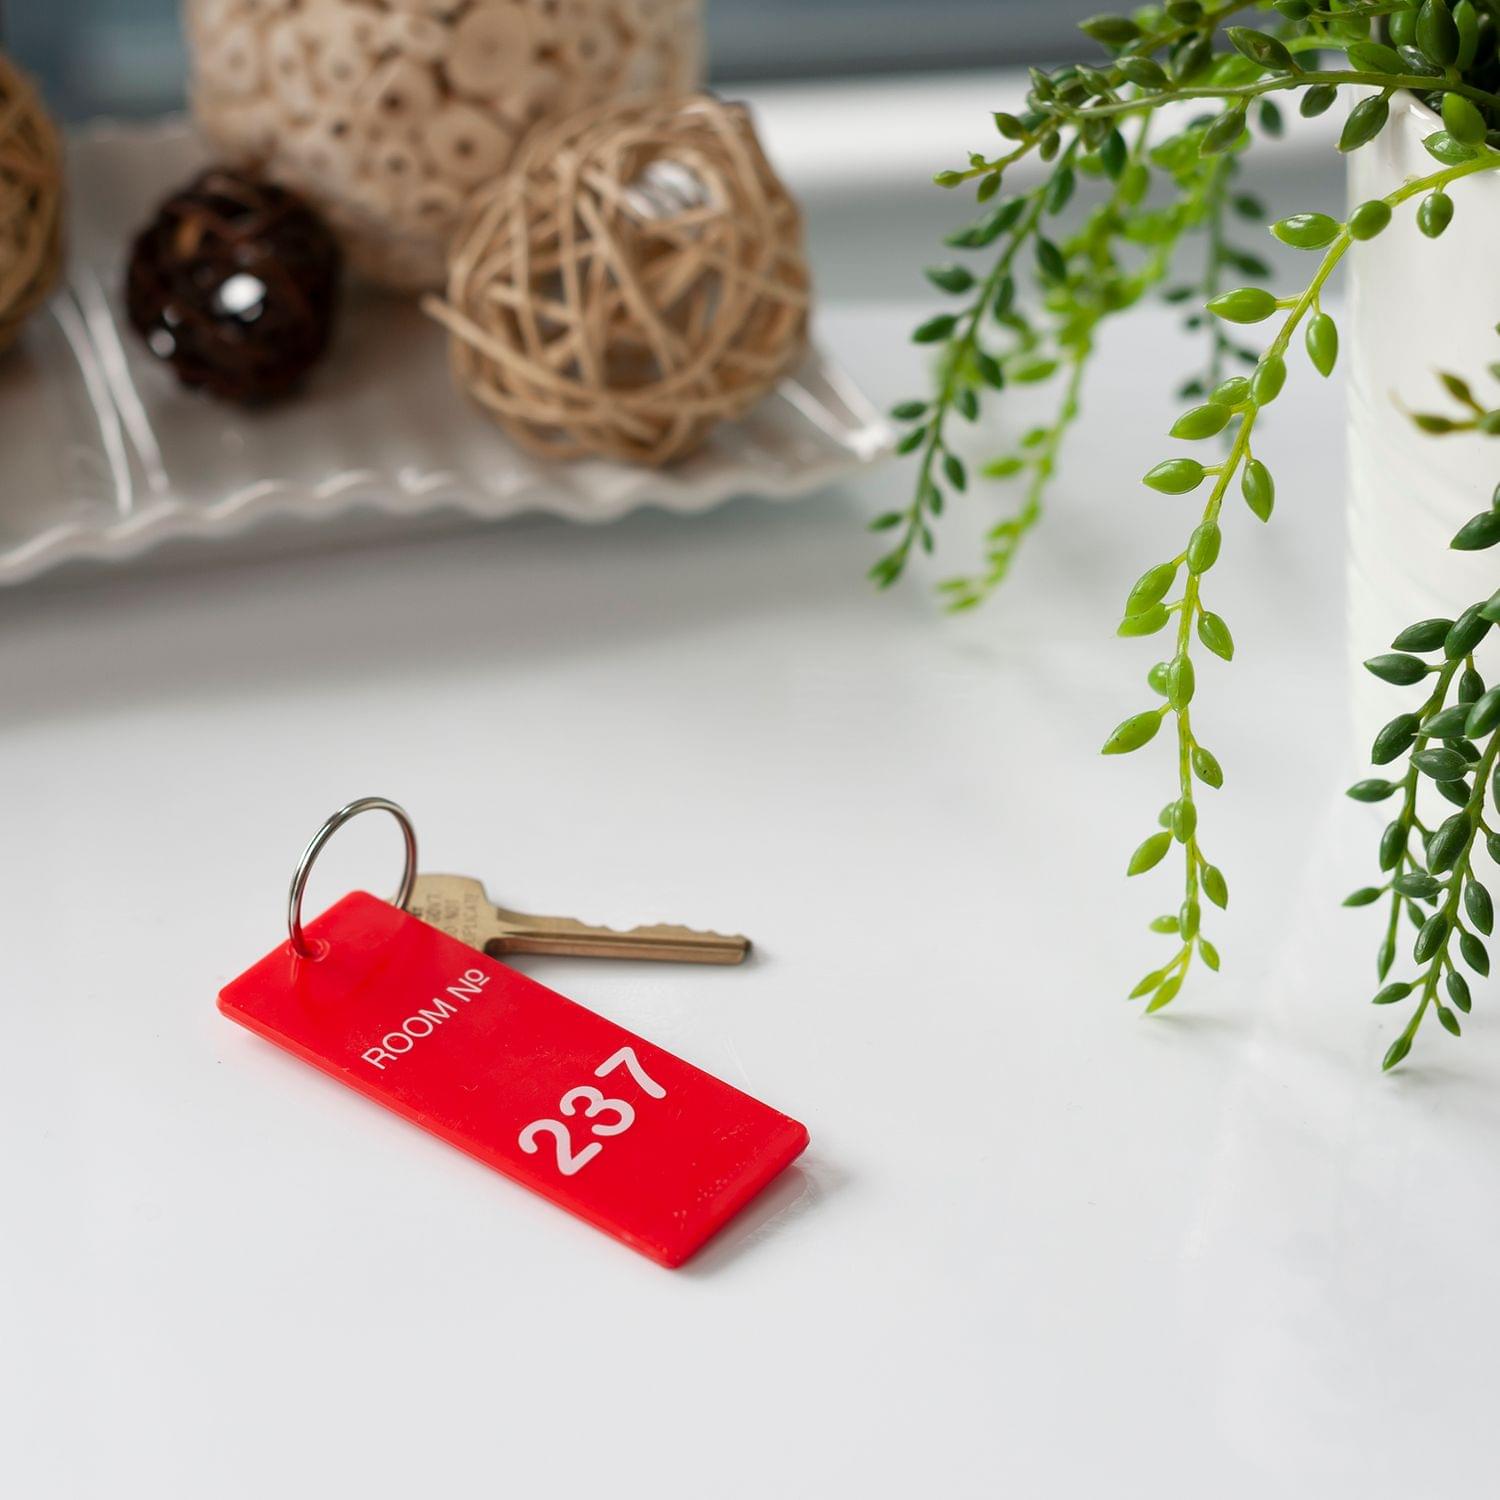 The Overlook Hotel Room 237 Keychain Room Key Tag Replica